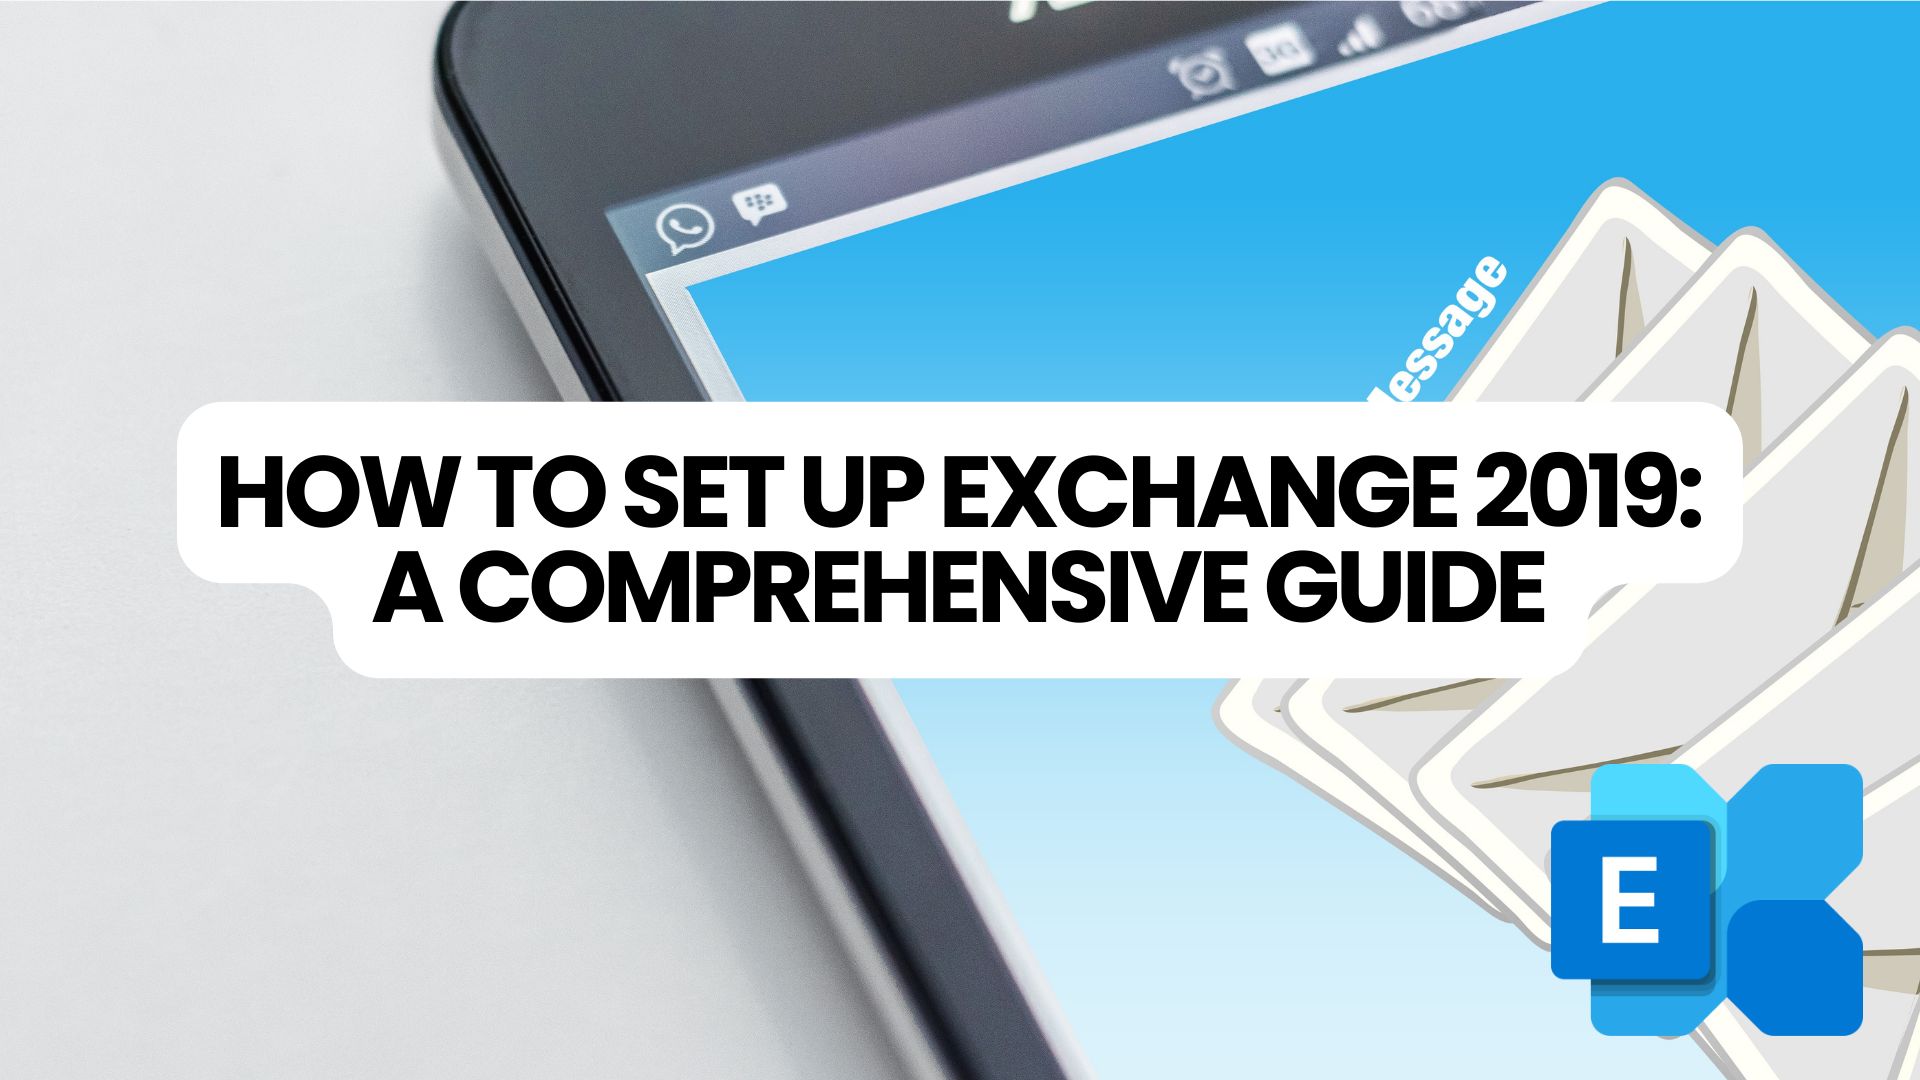 How to Set Up Exchange 2019 A Comprehensive Guide